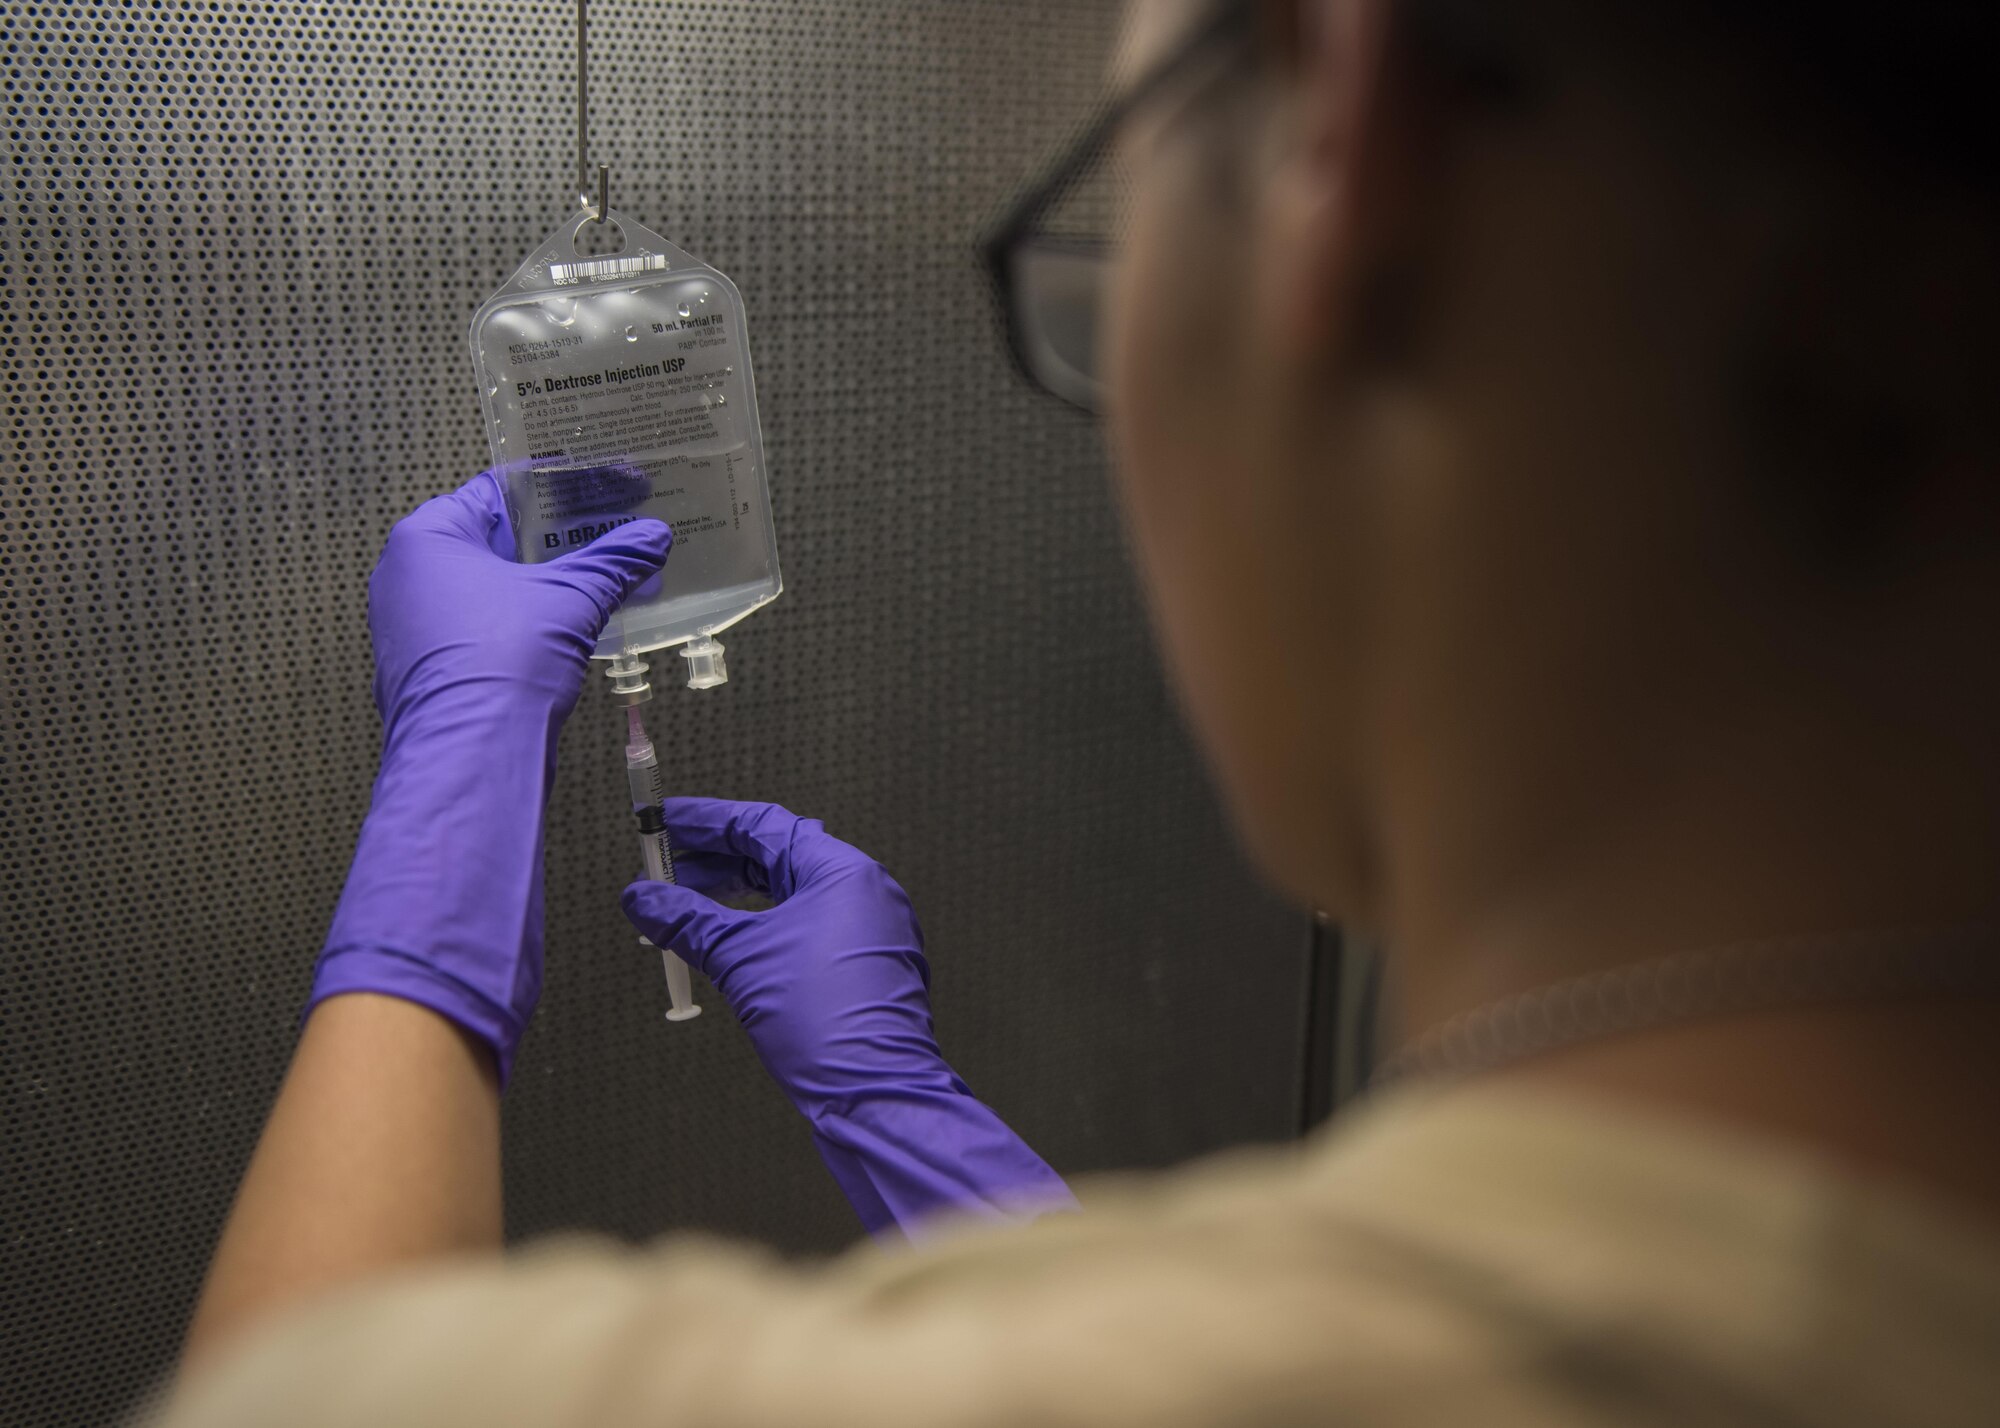 Senior Airman Latoya Kirven, 455th Expeditionary Medical Group pharmacy technician, makes an intravenous(IV) medication for patients at Craig Joint Theater Hospital, Bagram Airfield, Afghanistan, June 06, 2016. Airmen of the 455th EMDG pharmacy have made 621 IVs, filled 1,487 prescriptions, and compounded 9,119 doses for patients within the past month. (U.S. Air Force photo by Senior Airman Justyn M. Freeman)